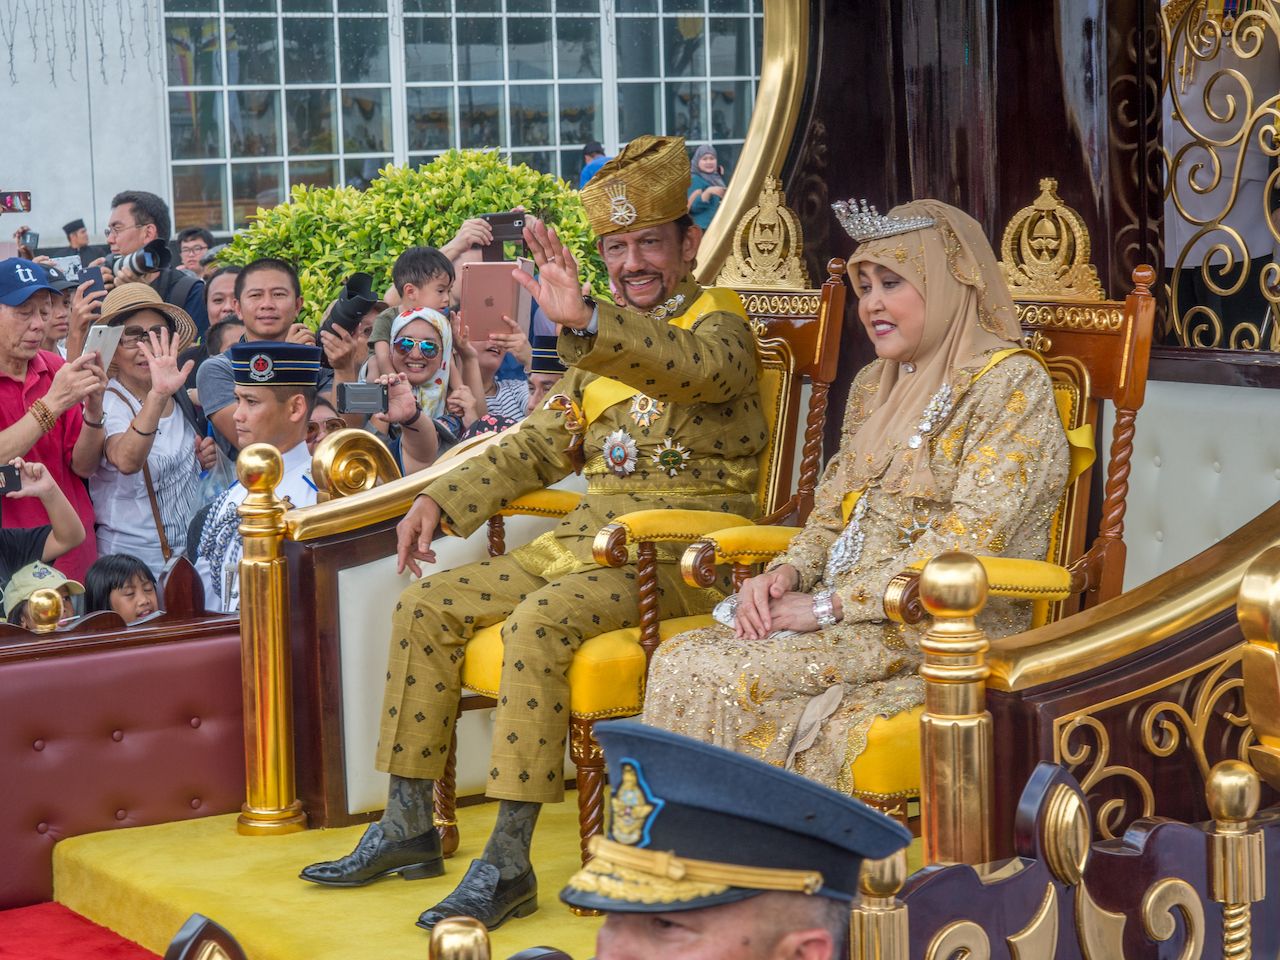 Brunei's Sultan marked 50 years on the throne with a glittering procession